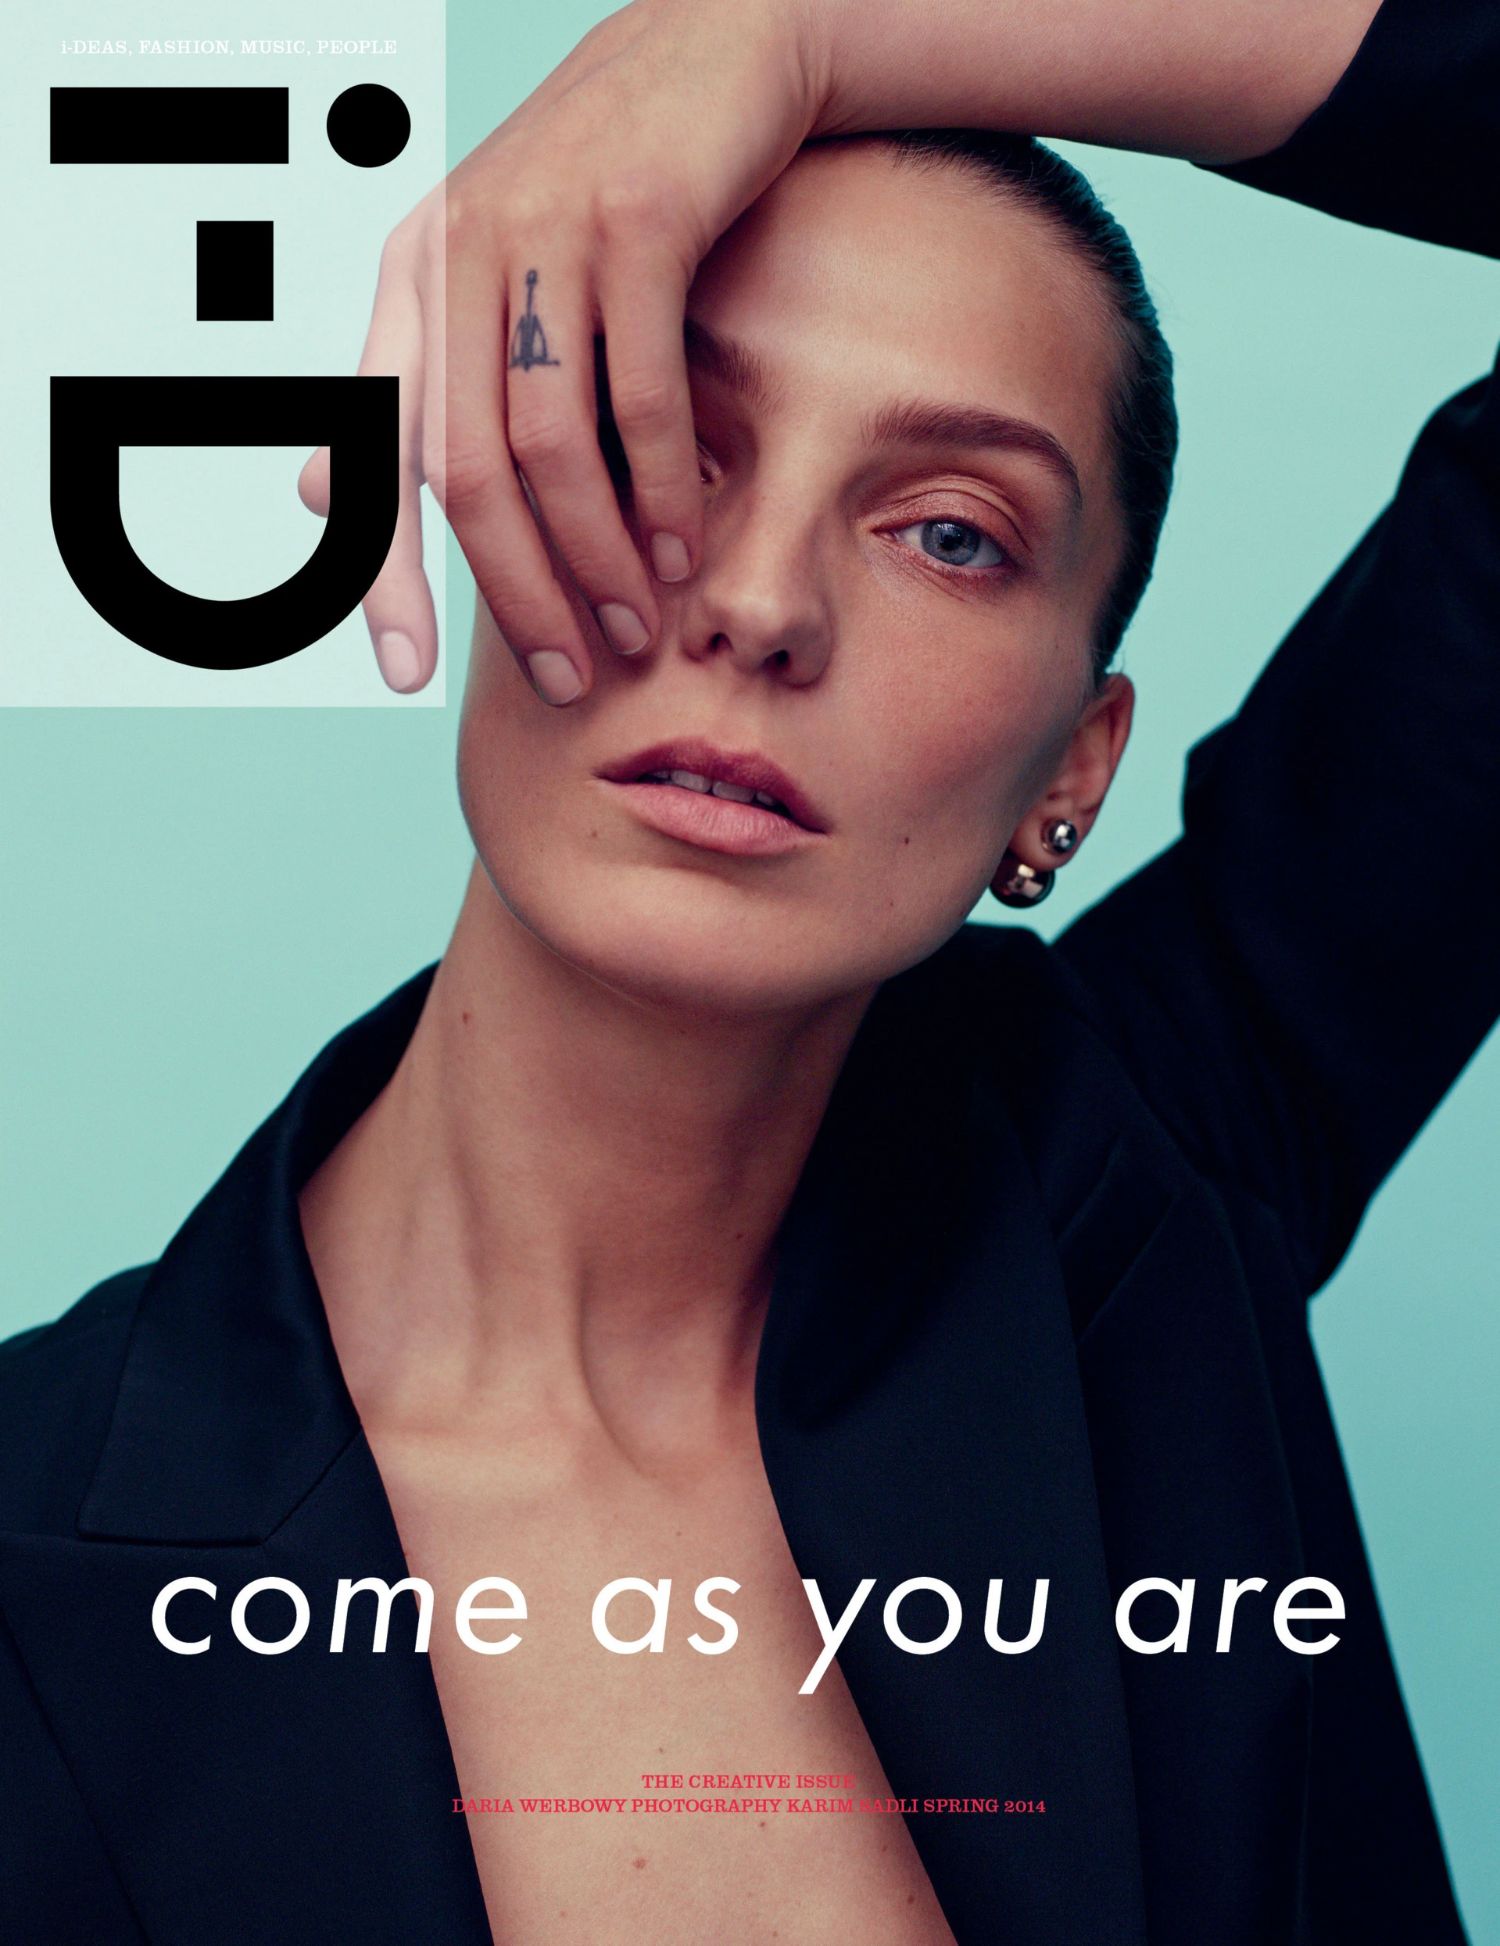 Daria Werbowy Covers i-D Magazine Spring 2014